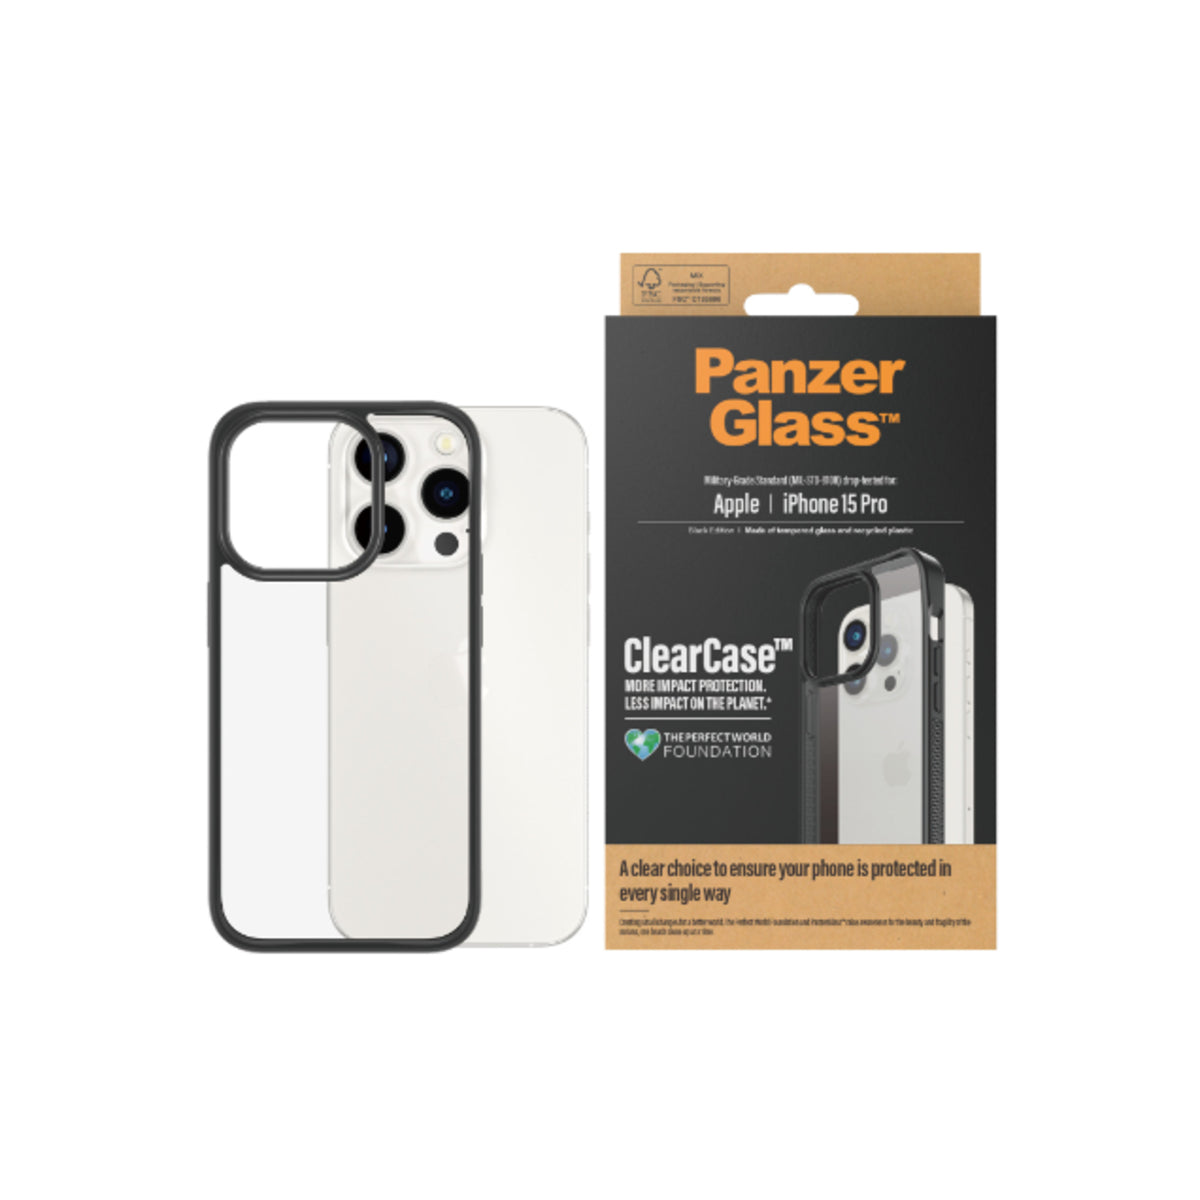 PanzerGlass Clear Case Phone Case for iPhone 15 Pro